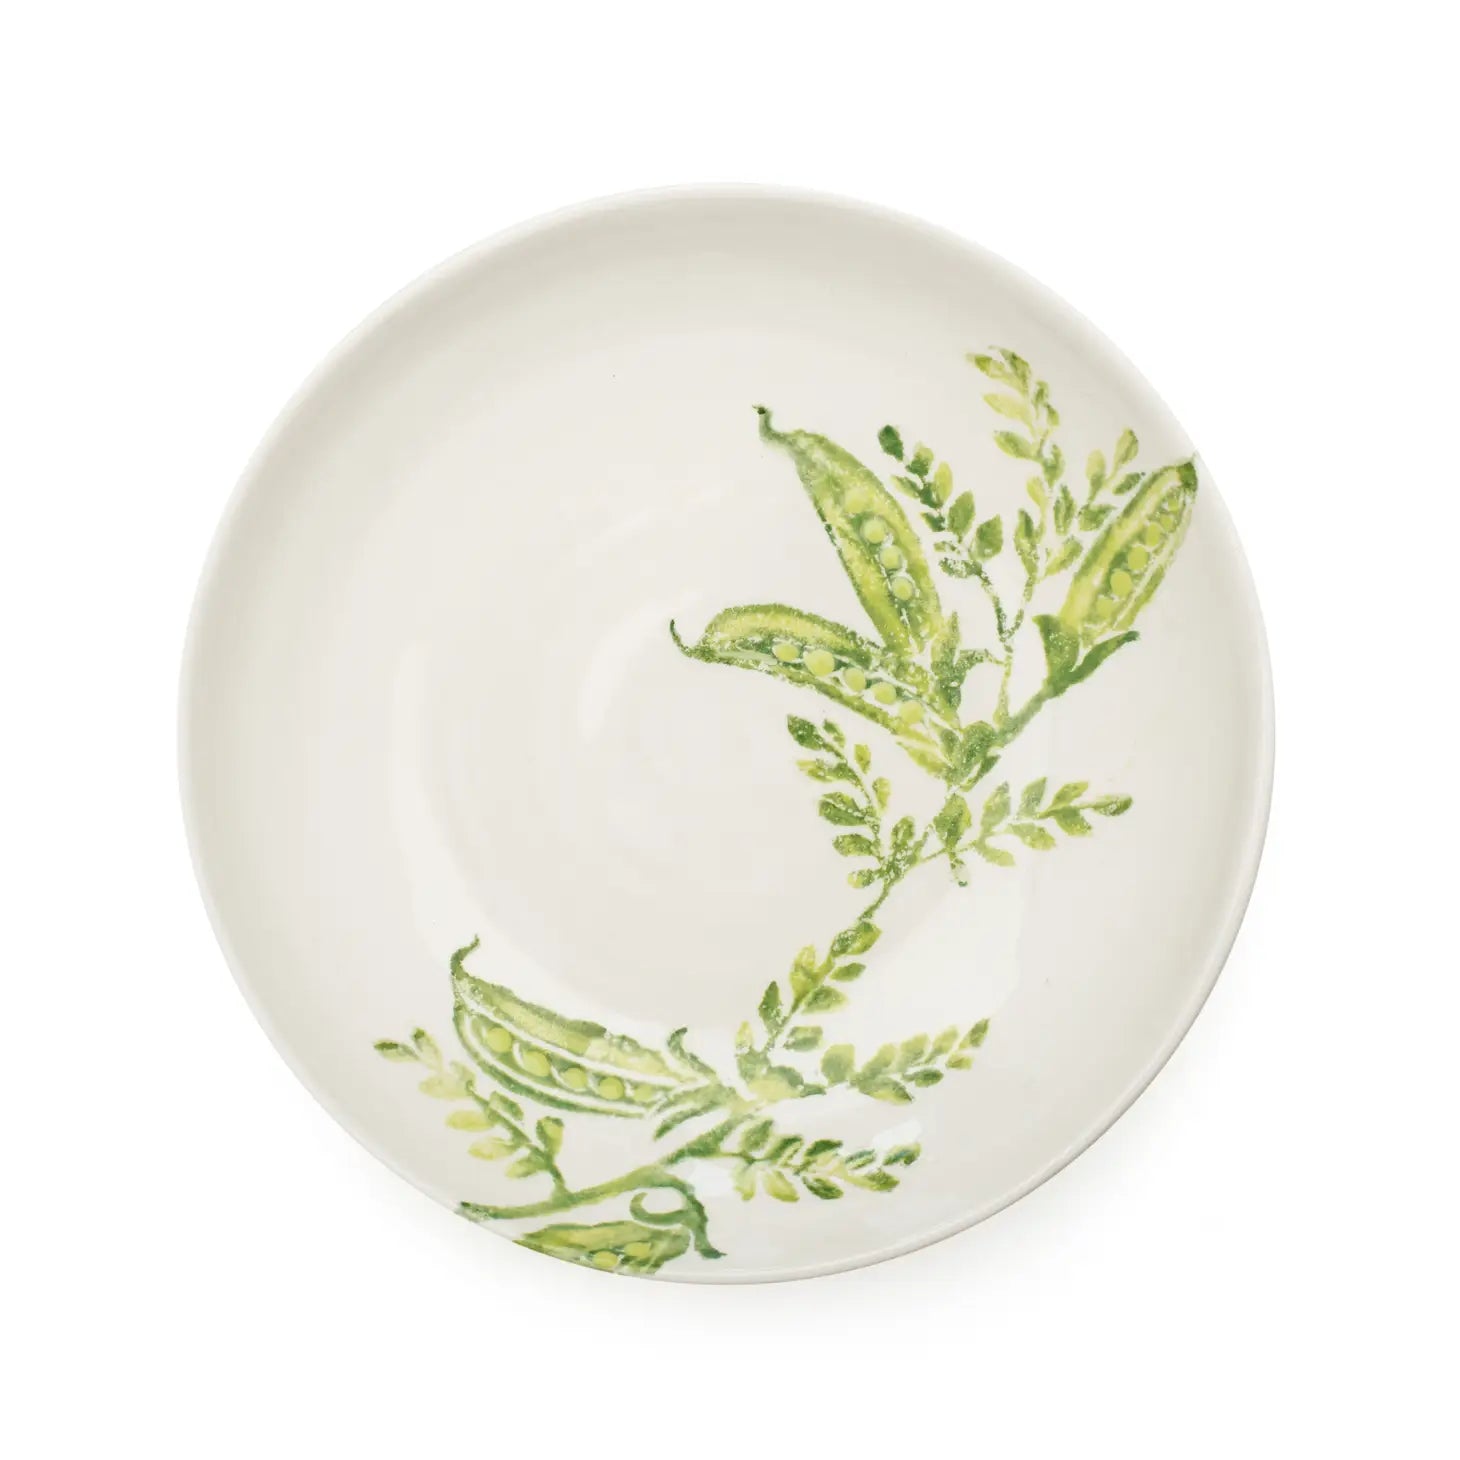 pasta or salad bowl in white ceramic with hand painted peas in pods